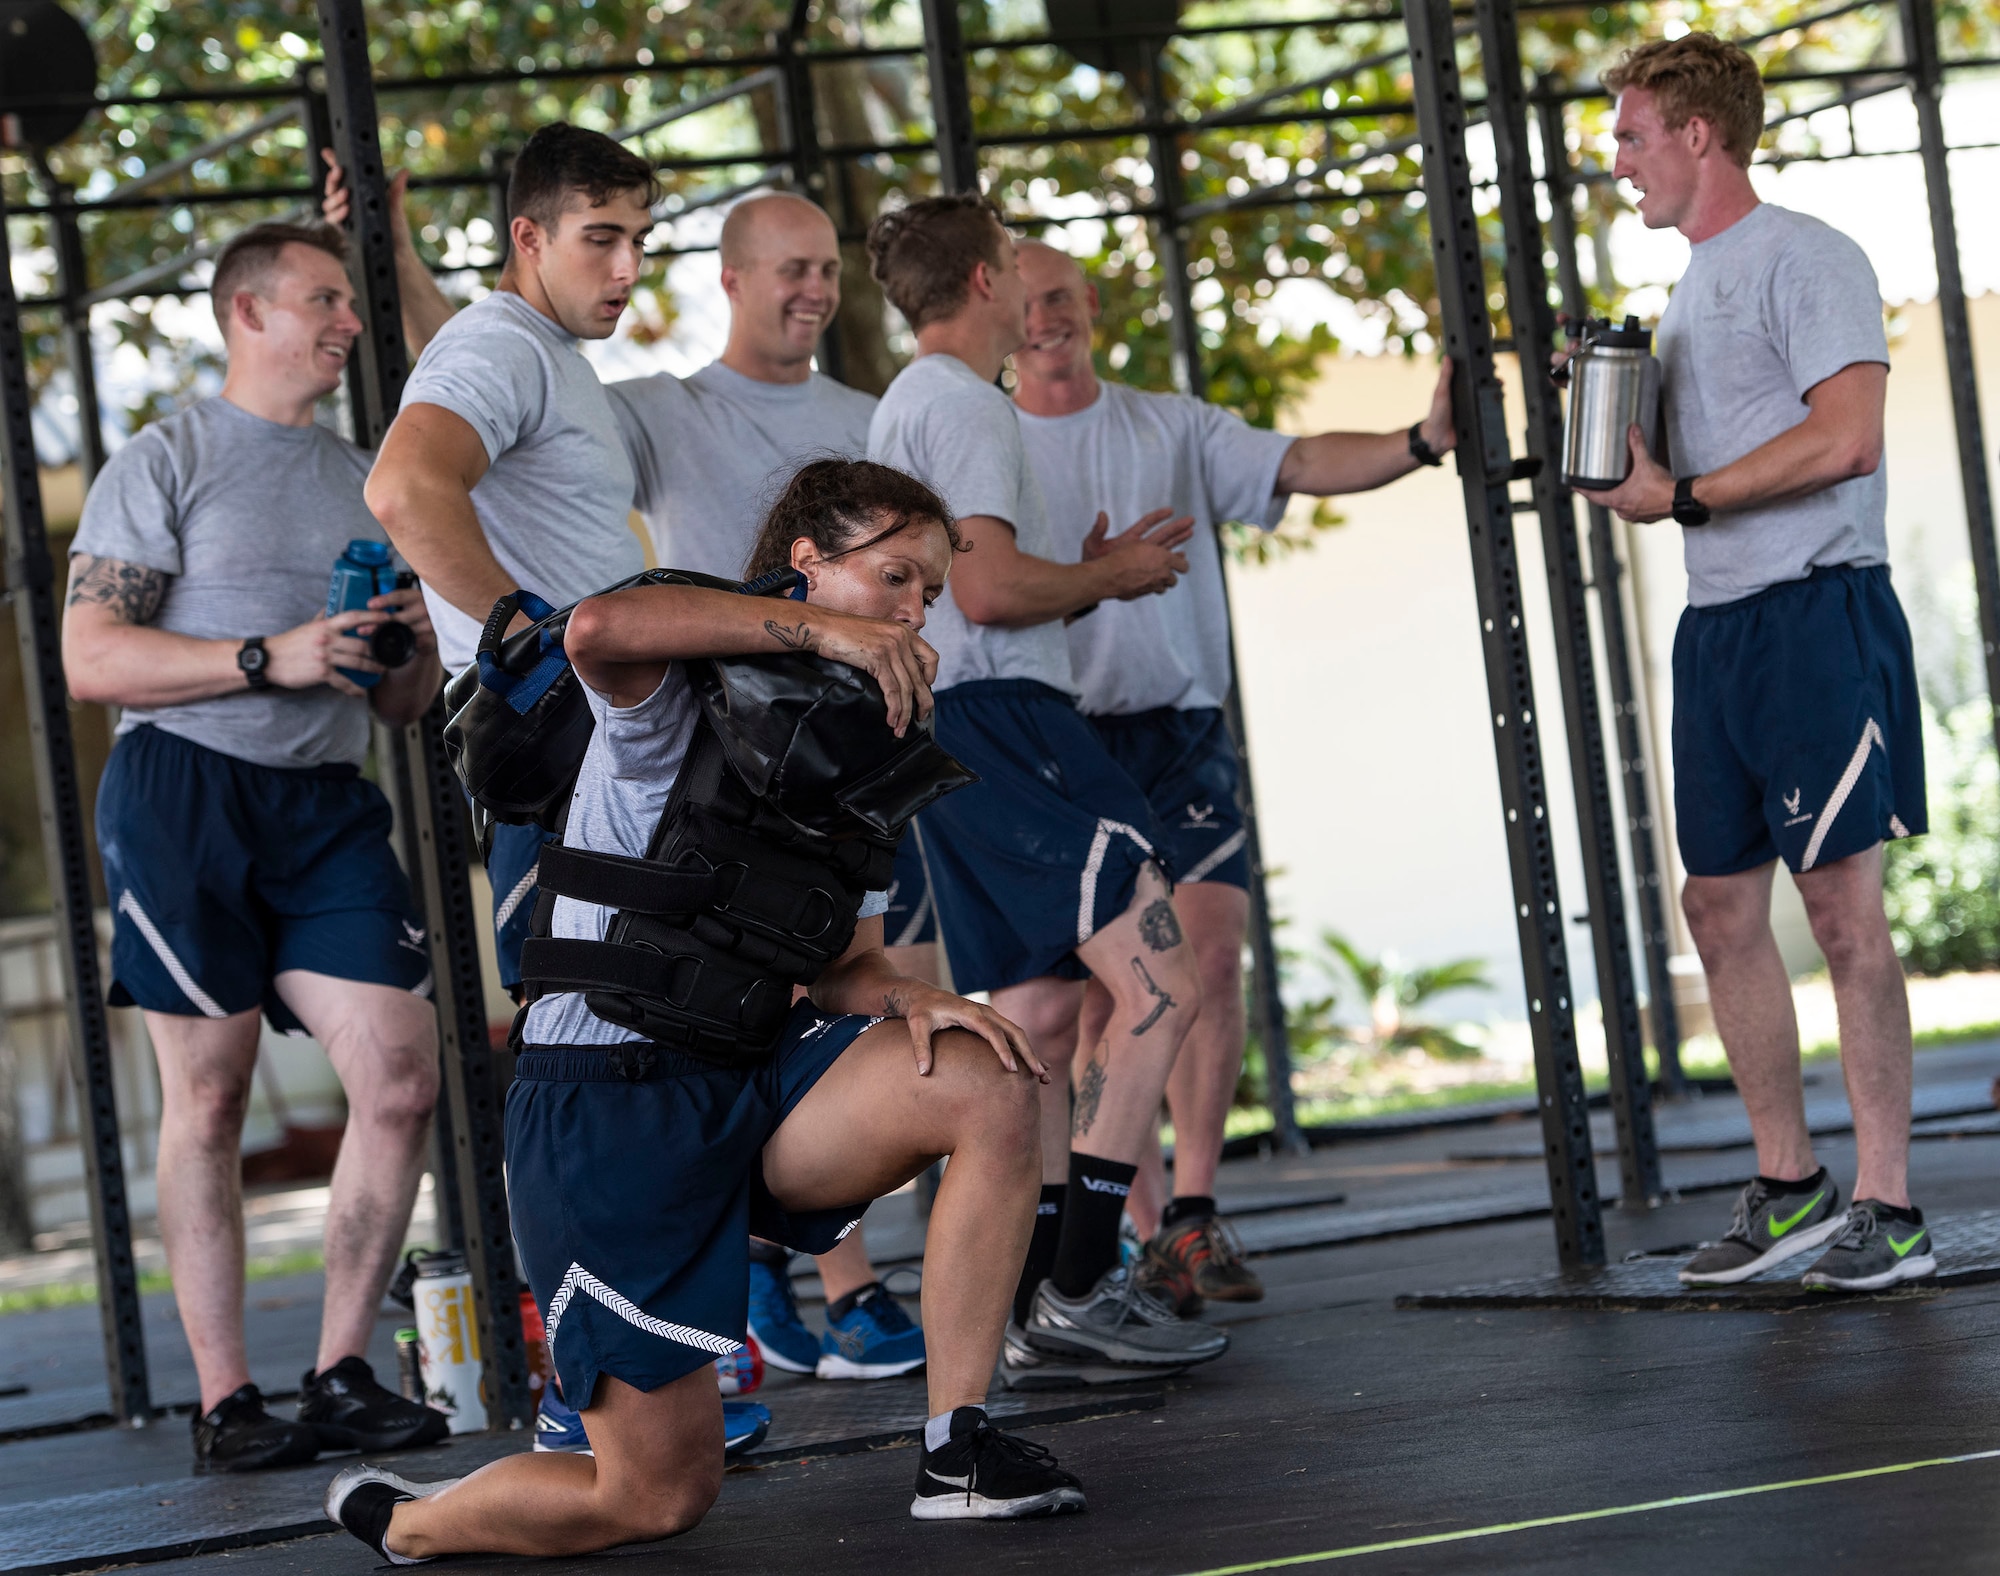 The 96th Civil Engineer Group’s EOD flight recently hosted and participated in the beta test for the Air Force’s prototype of the new EOD ‘Tier 2’ physical fitness test based on job demands Sept. 10 – 12, 2018.